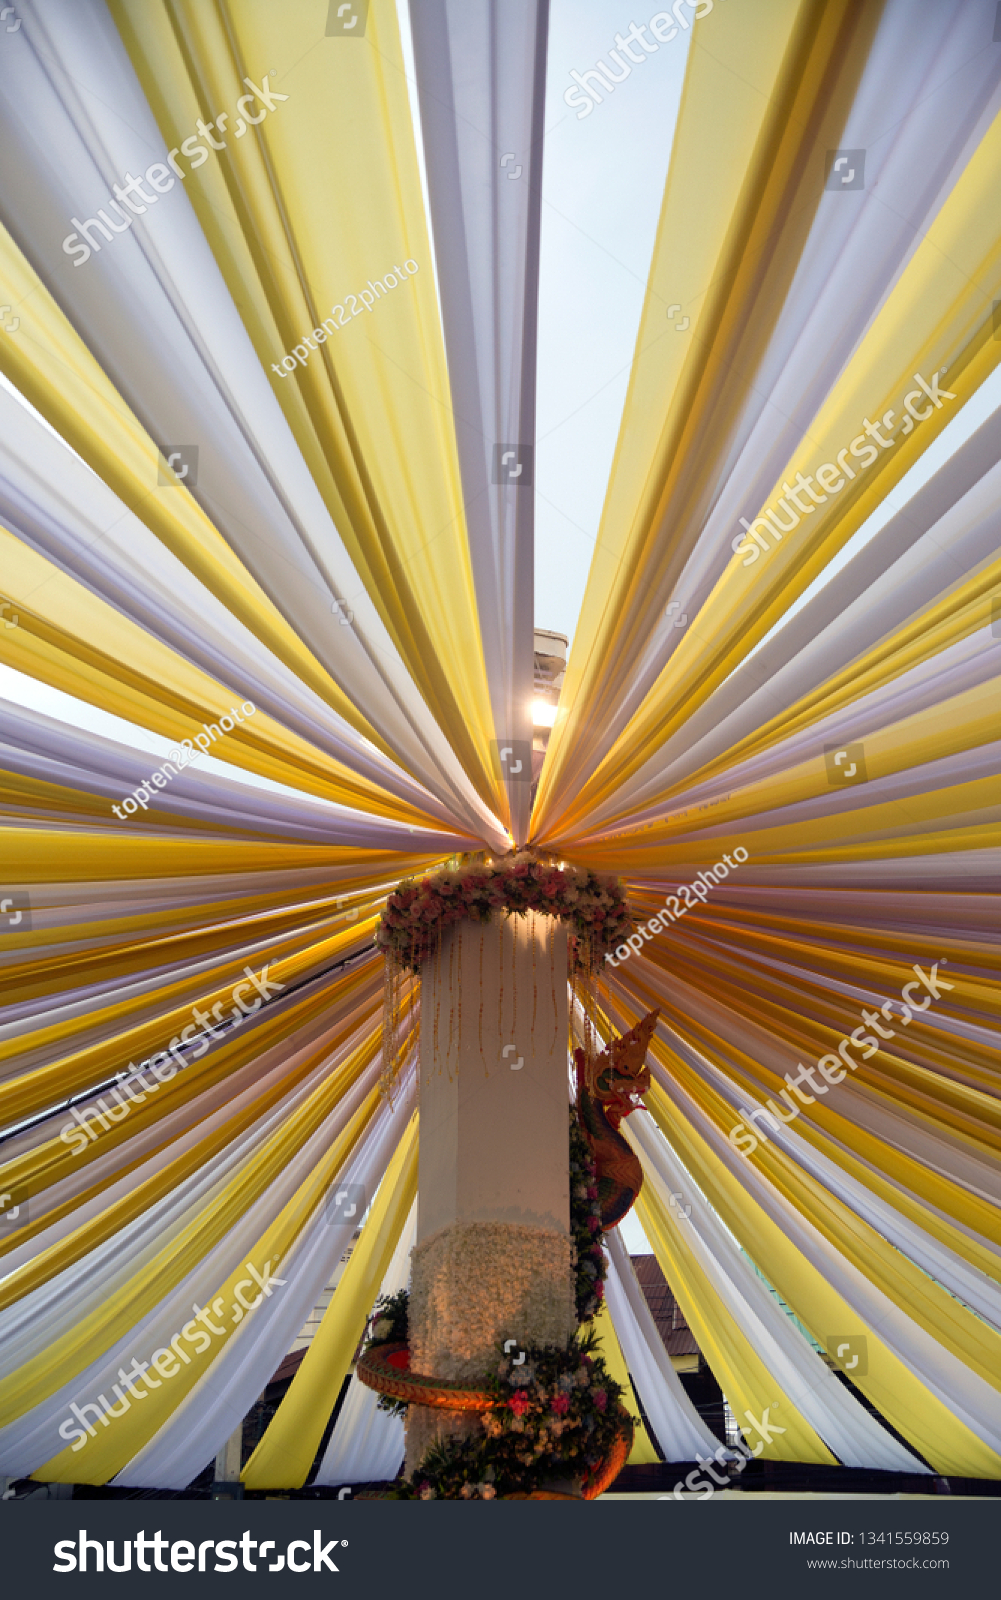 The fabric that is stretched is a large sun-shading tent. #1341559859